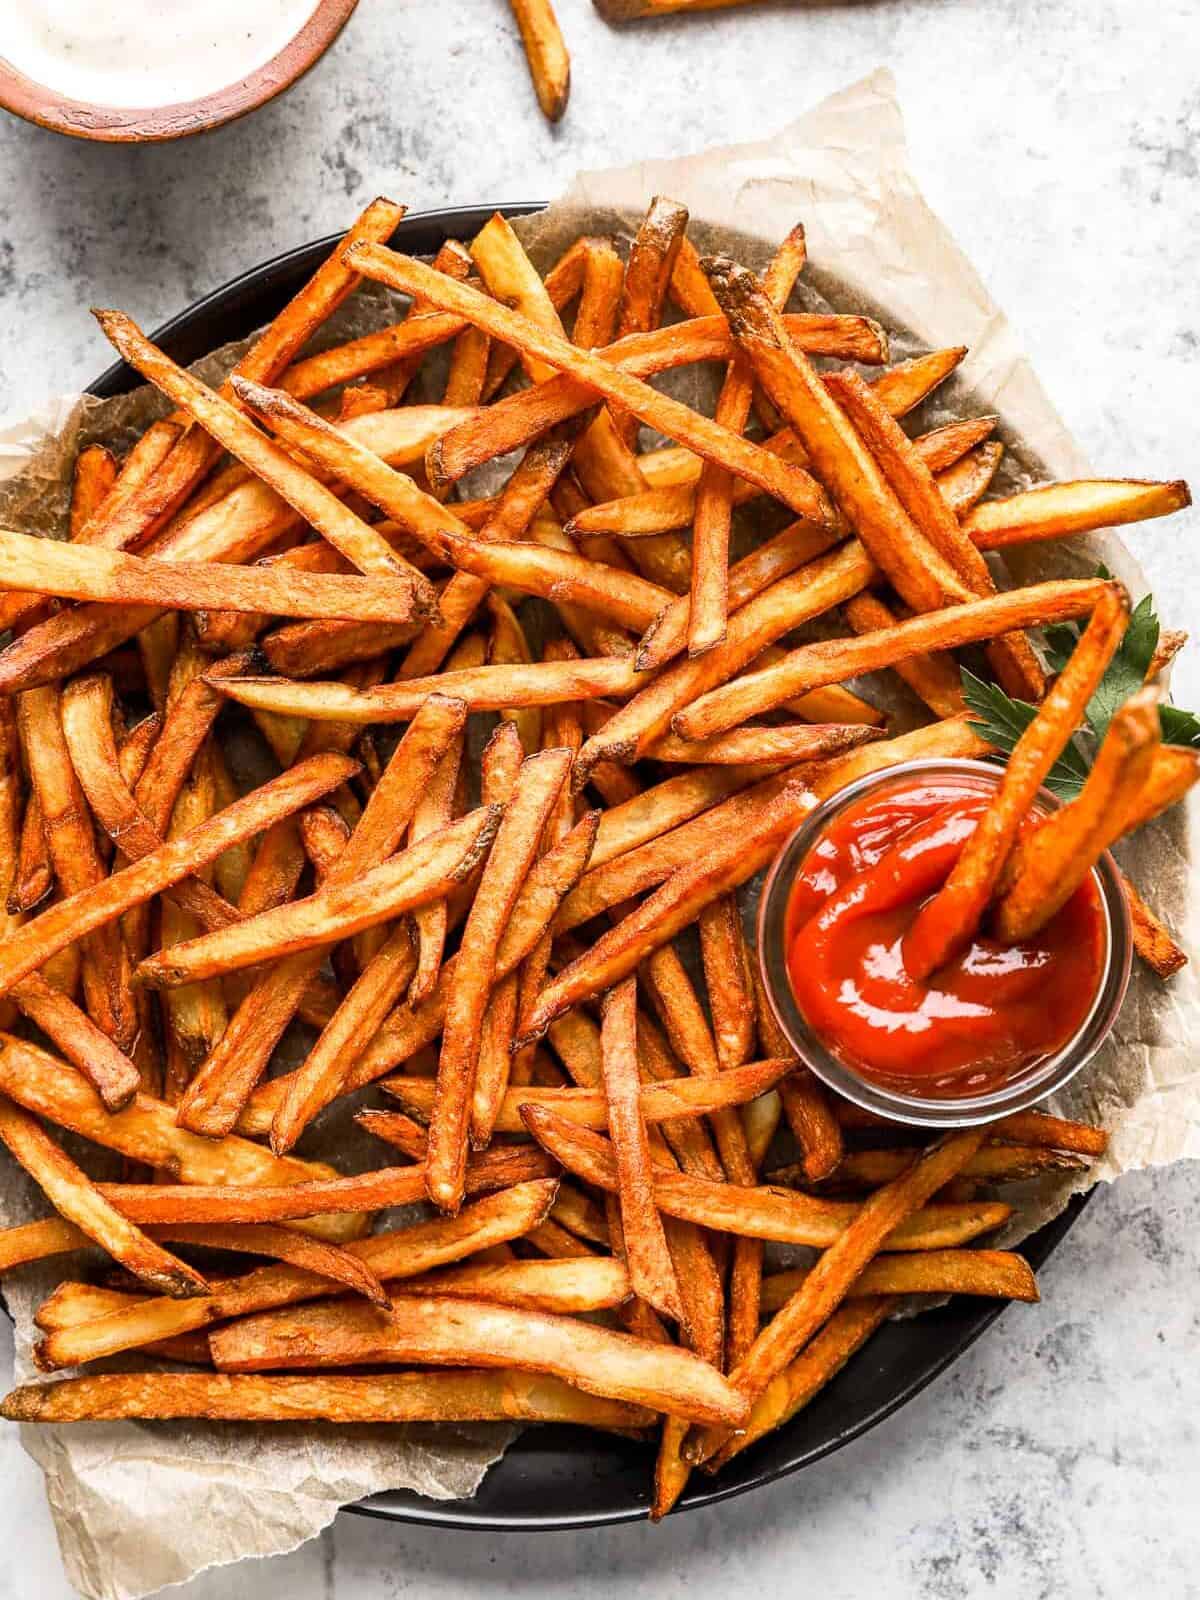 homemade french fries on a round serving tray with a cup of ketchup.